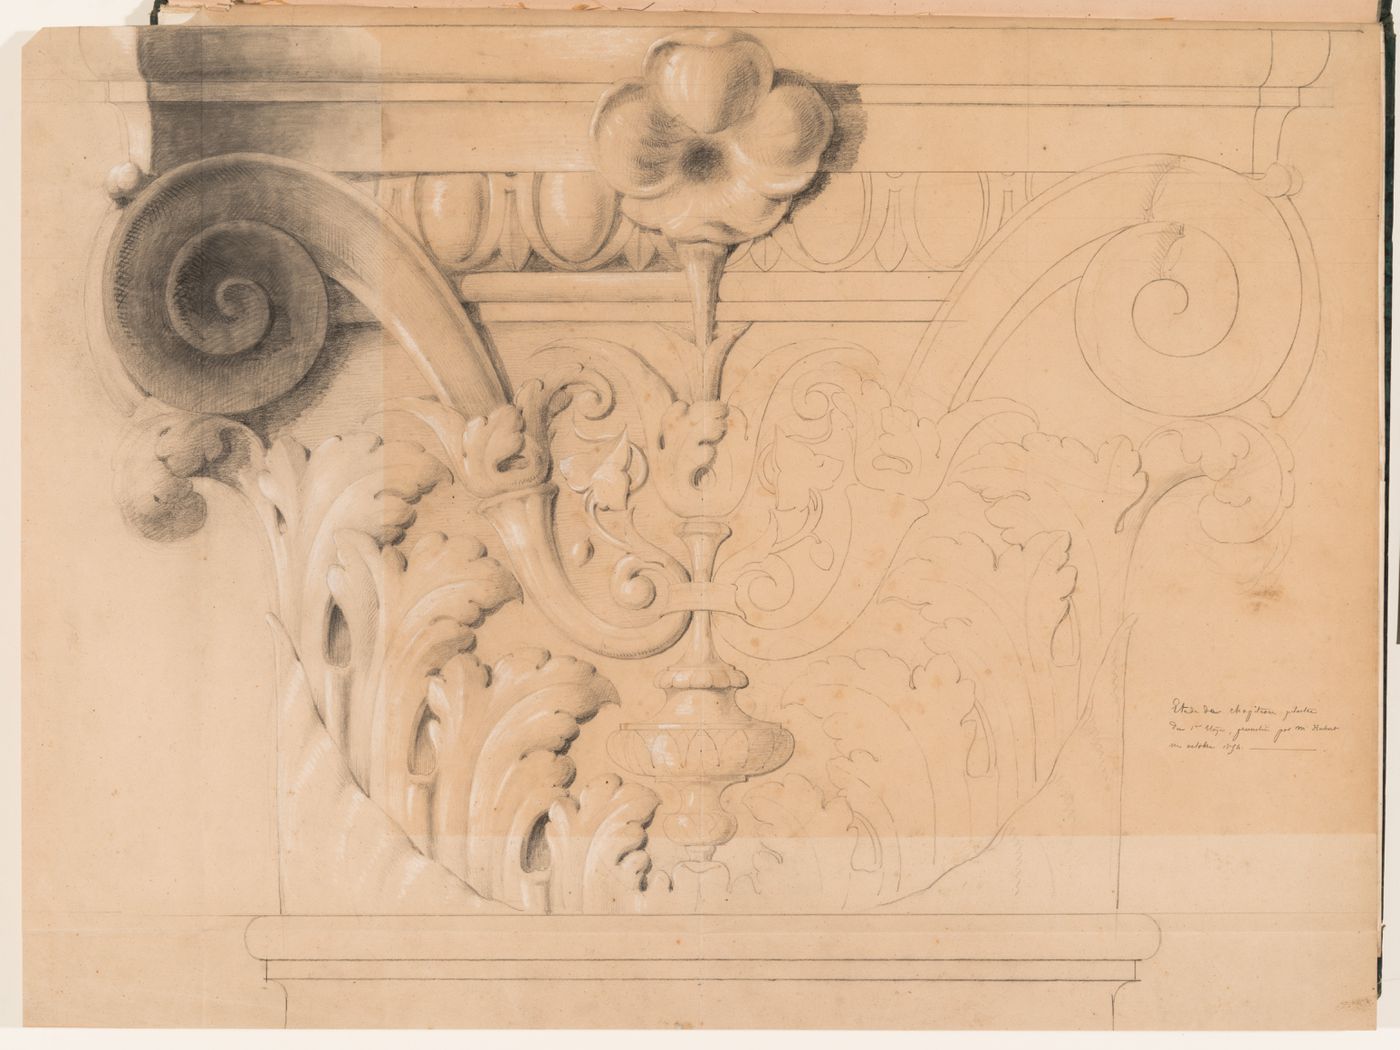 Elevation for a Corinthian pilaster capital for the first floor, Hotel Soltykoff, Paris